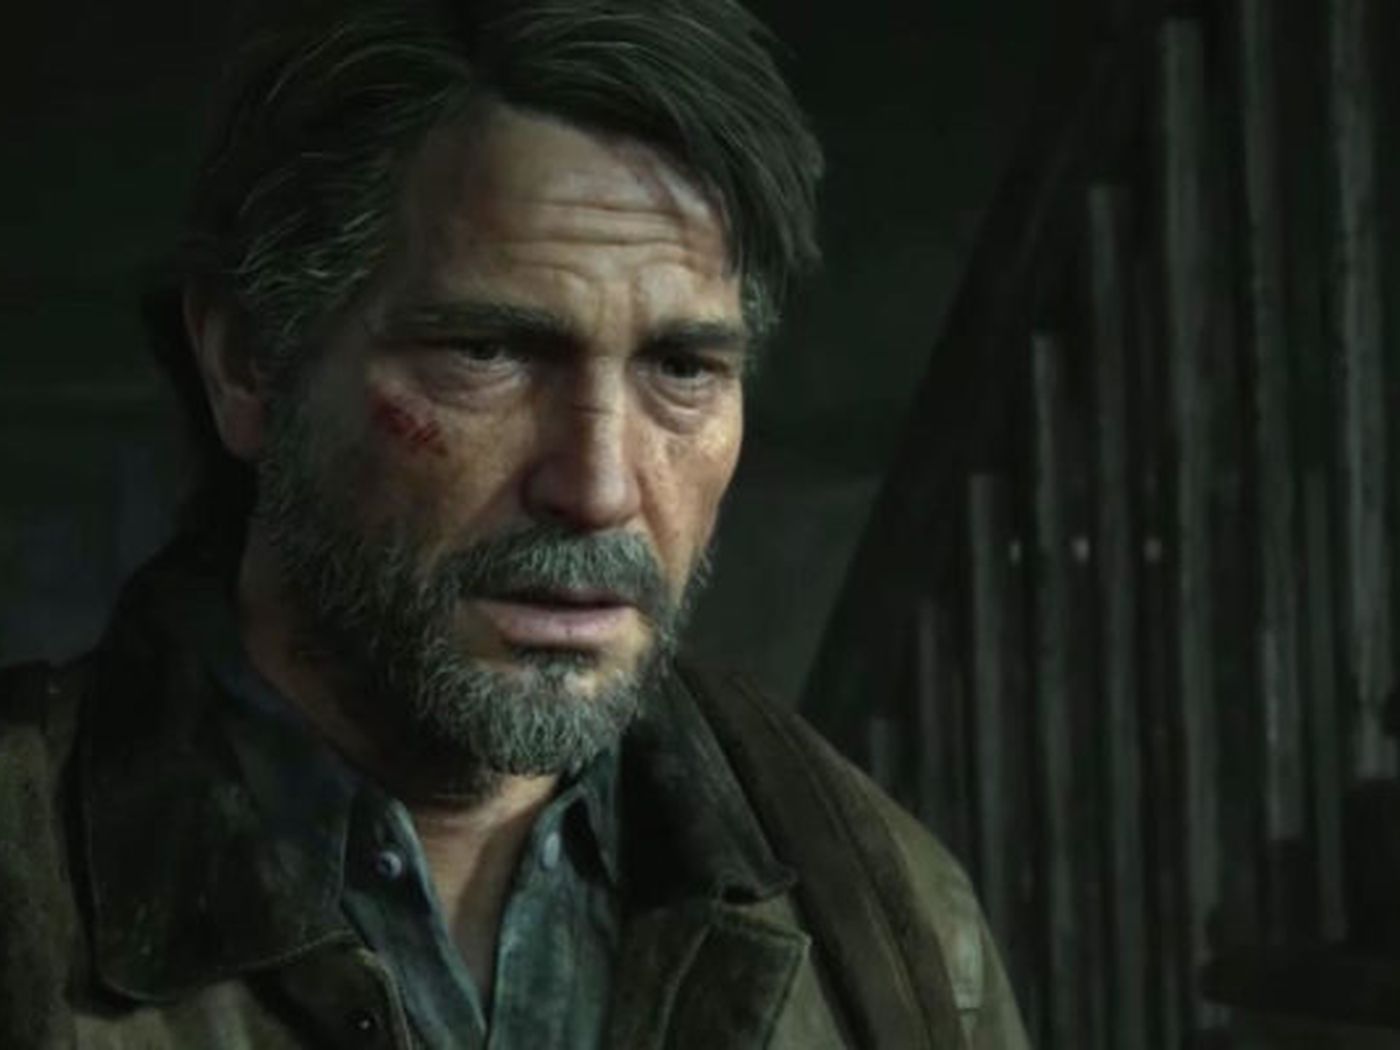 The Last of Us Part II has been delayed until May 2020